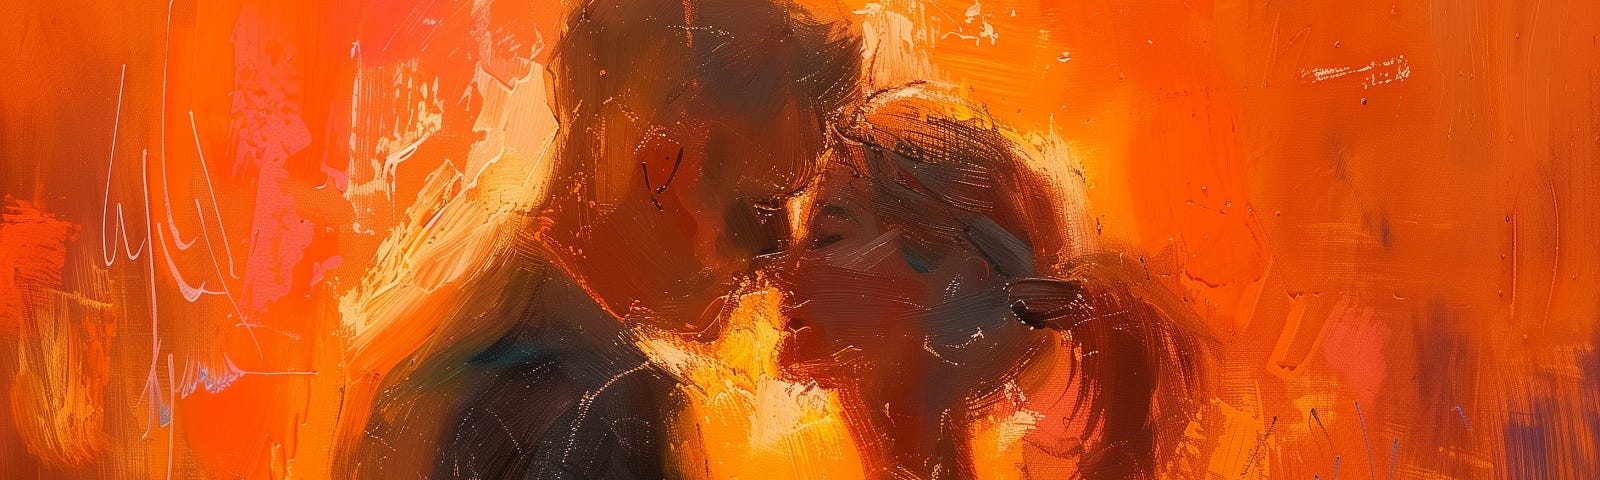 An abstract painting of two figures in a warm embrace, their faces close together, against a vibrant orange background. The brushstrokes are expressive, blending and swirling colors to evoke a sense of intimacy, passion, the merging and kissing of spirits.